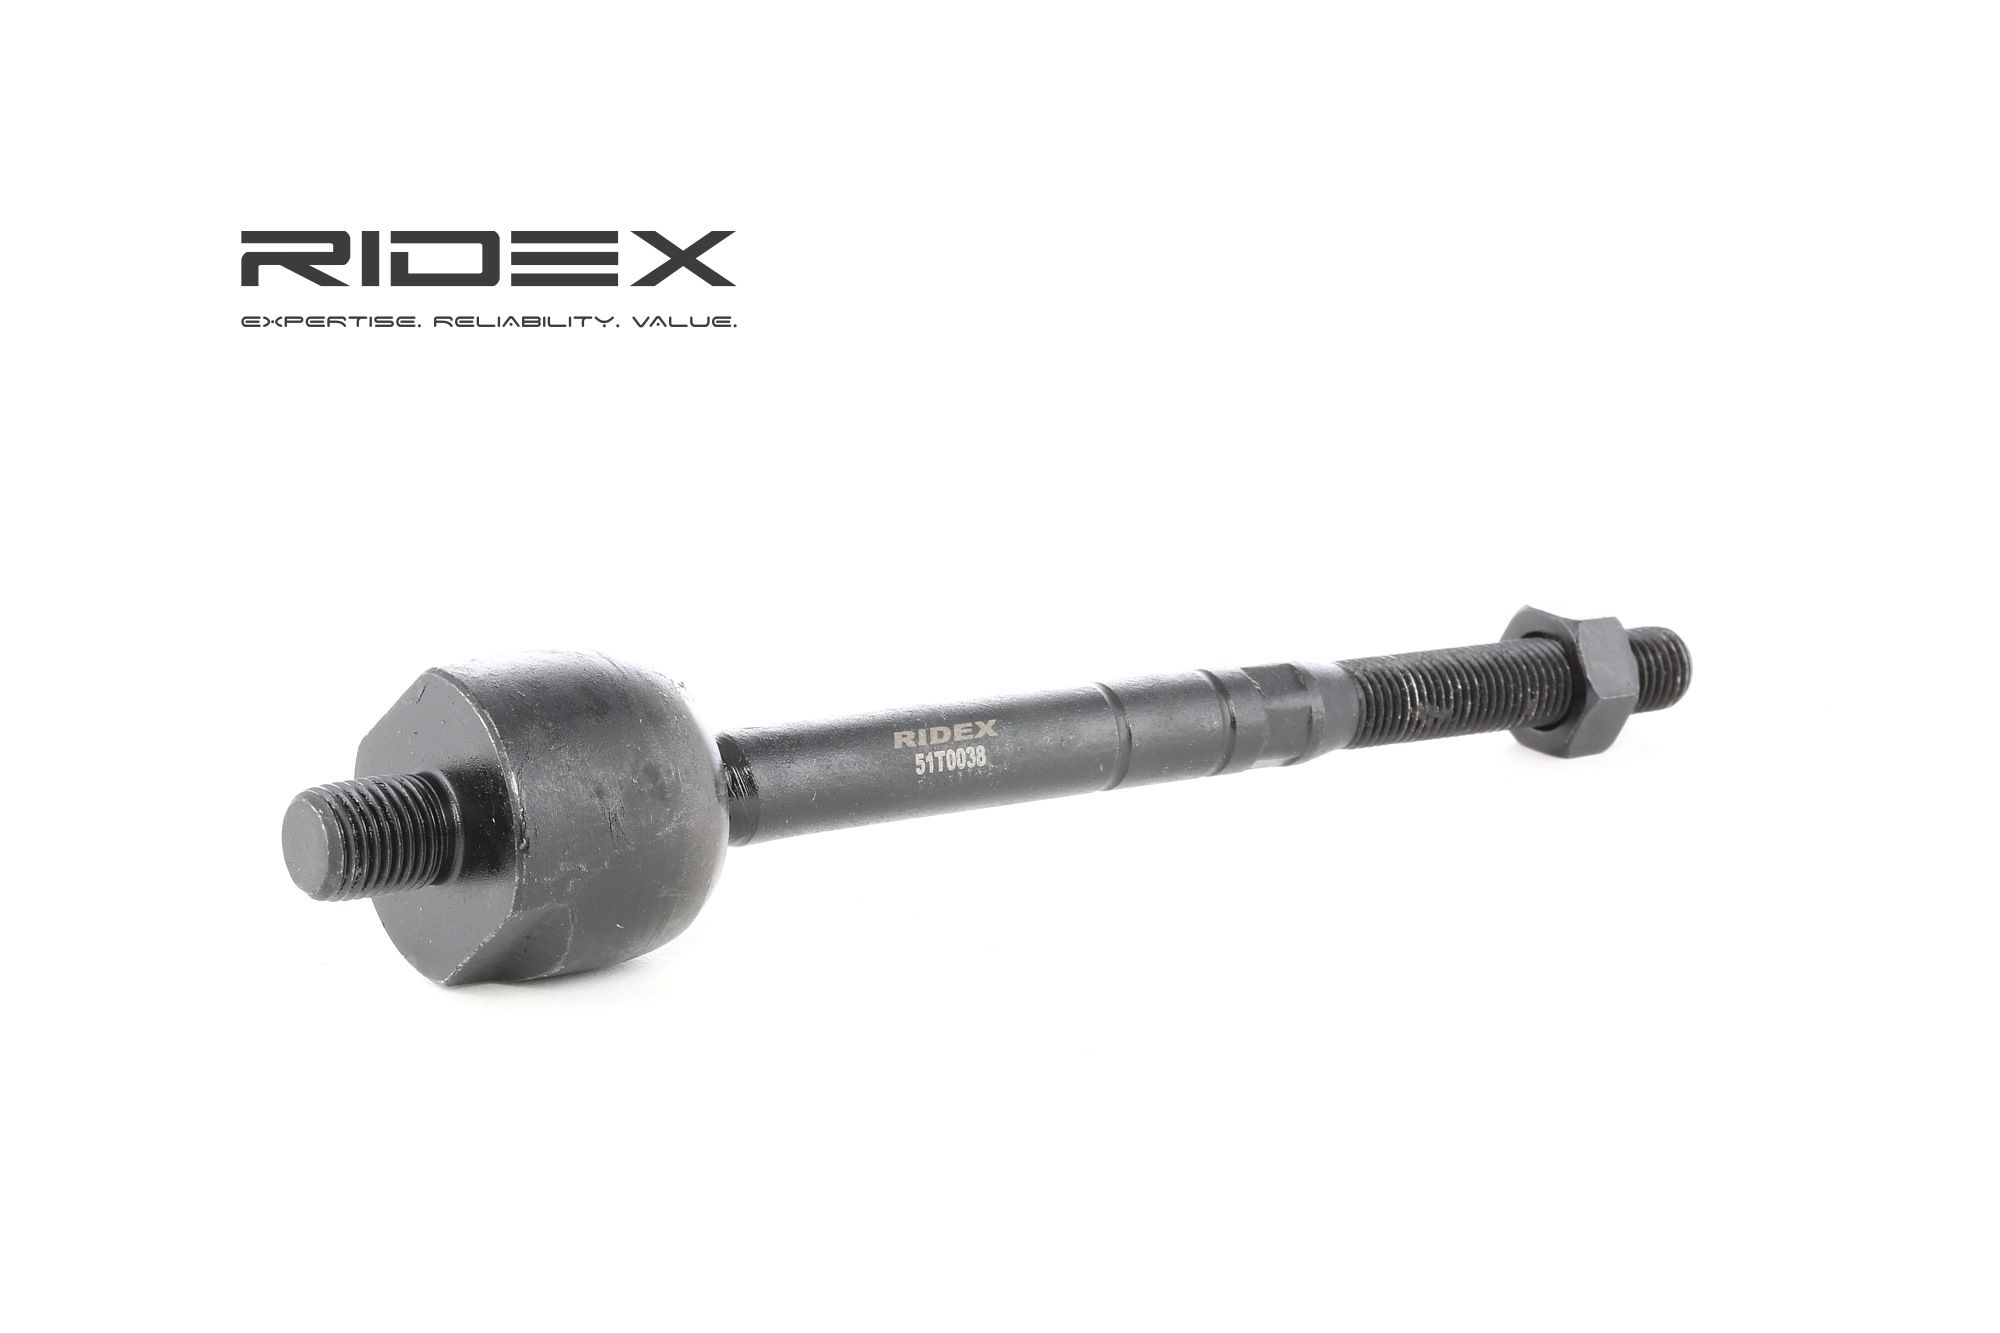 RIDEX Front axle both sides, M14x1,5, 212 mm Length: 212mm Tie rod axle joint 51T0038 buy